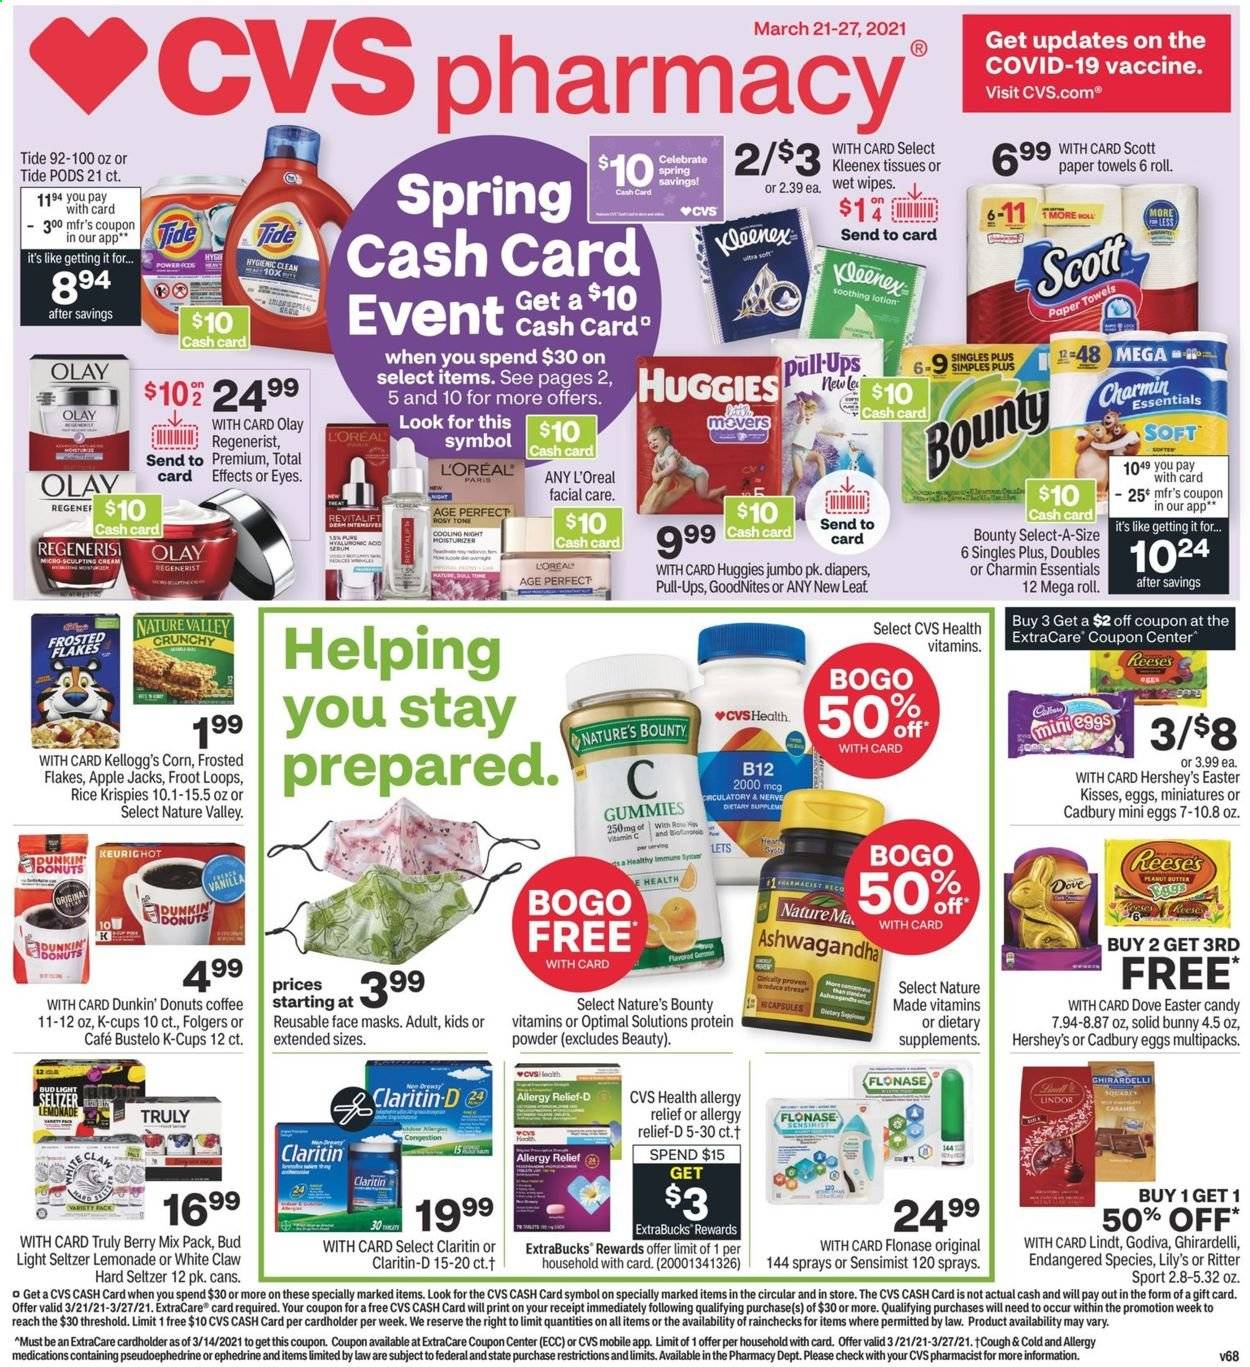 thumbnail - CVS Pharmacy Flyer - 03/21/2021 - 03/27/2021 - Sales products - Reese's, Hershey's, Lindt, Lindor, Bounty, Godiva, Kellogg's, Cadbury, Ritter Sport, Ghirardelli, corn, Rice Krispies, Frosted Flakes, Nature Valley, lemonade, seltzer water, coffee, Folgers, coffee capsules, K-Cups, Dunkin' Donuts, White Claw, Hard Seltzer, TRULY, Huggies, Dove, Kleenex, tissues, kitchen towels, paper towels, Charmin, wipes, Tide, L’Oréal, Olay, body lotion, Scott, Nature Made, Nature's Bounty, whey protein, allergy relief, dietary supplement, face mask, beer, Bud Light, donut. Page 1.